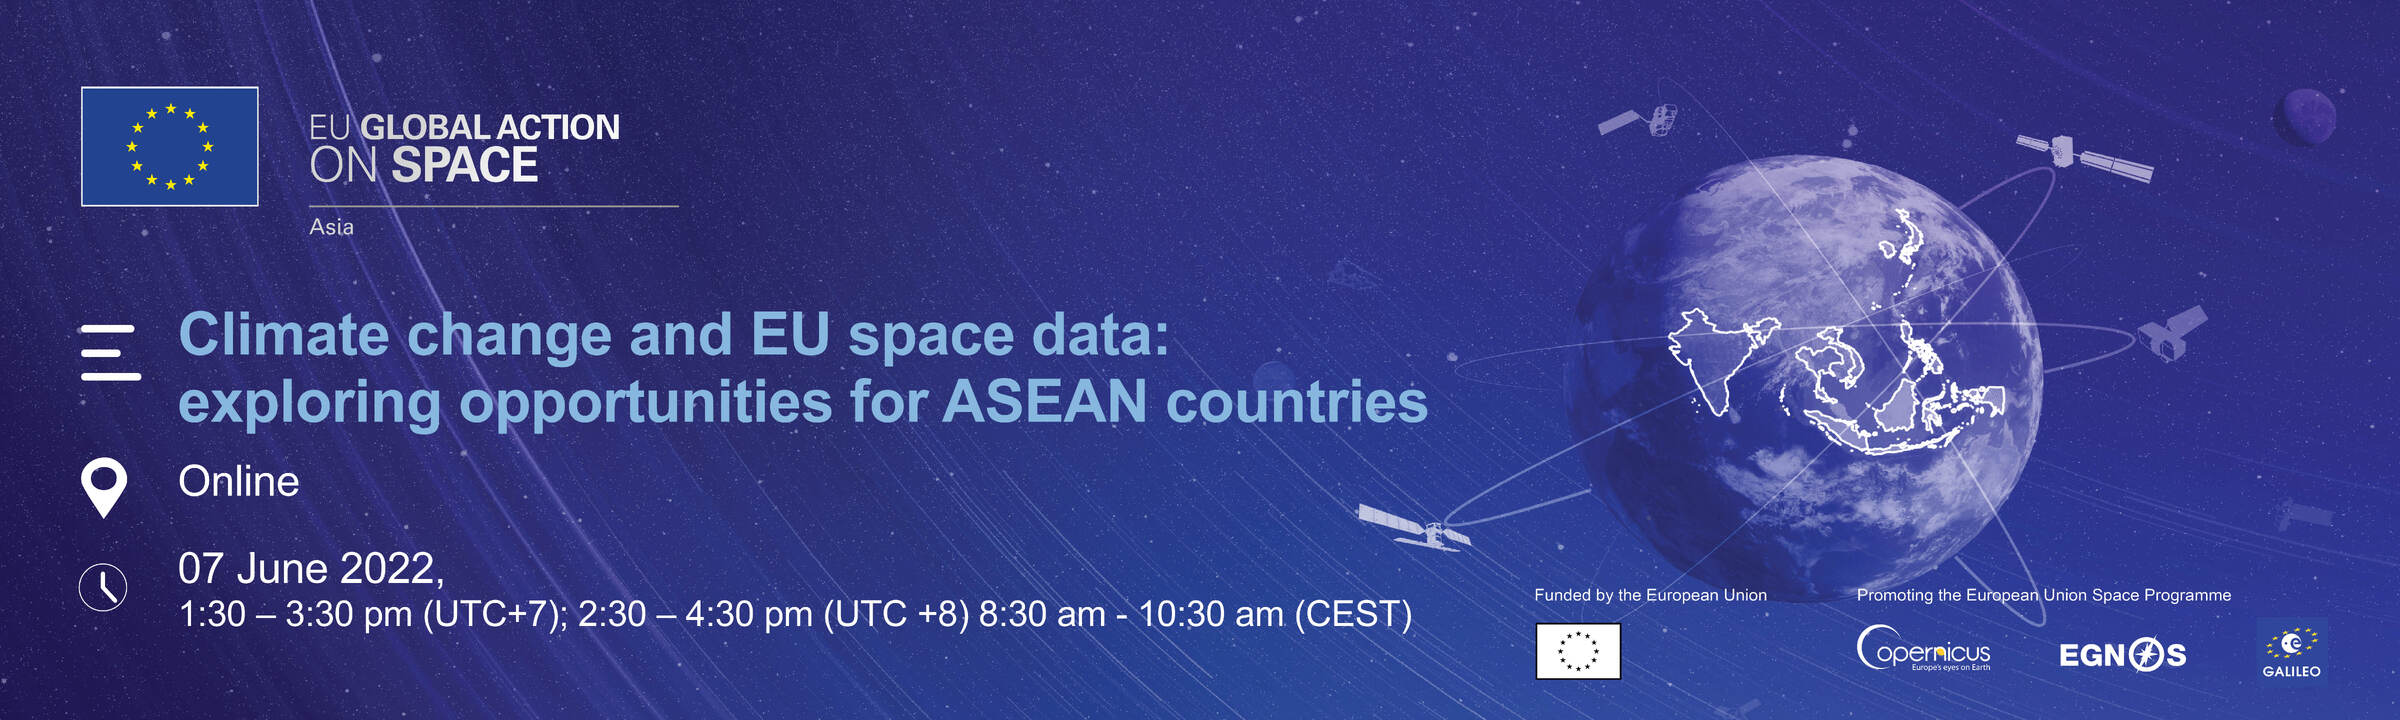 Climate change and EU space data: exploring opportunities for ASEAN countries